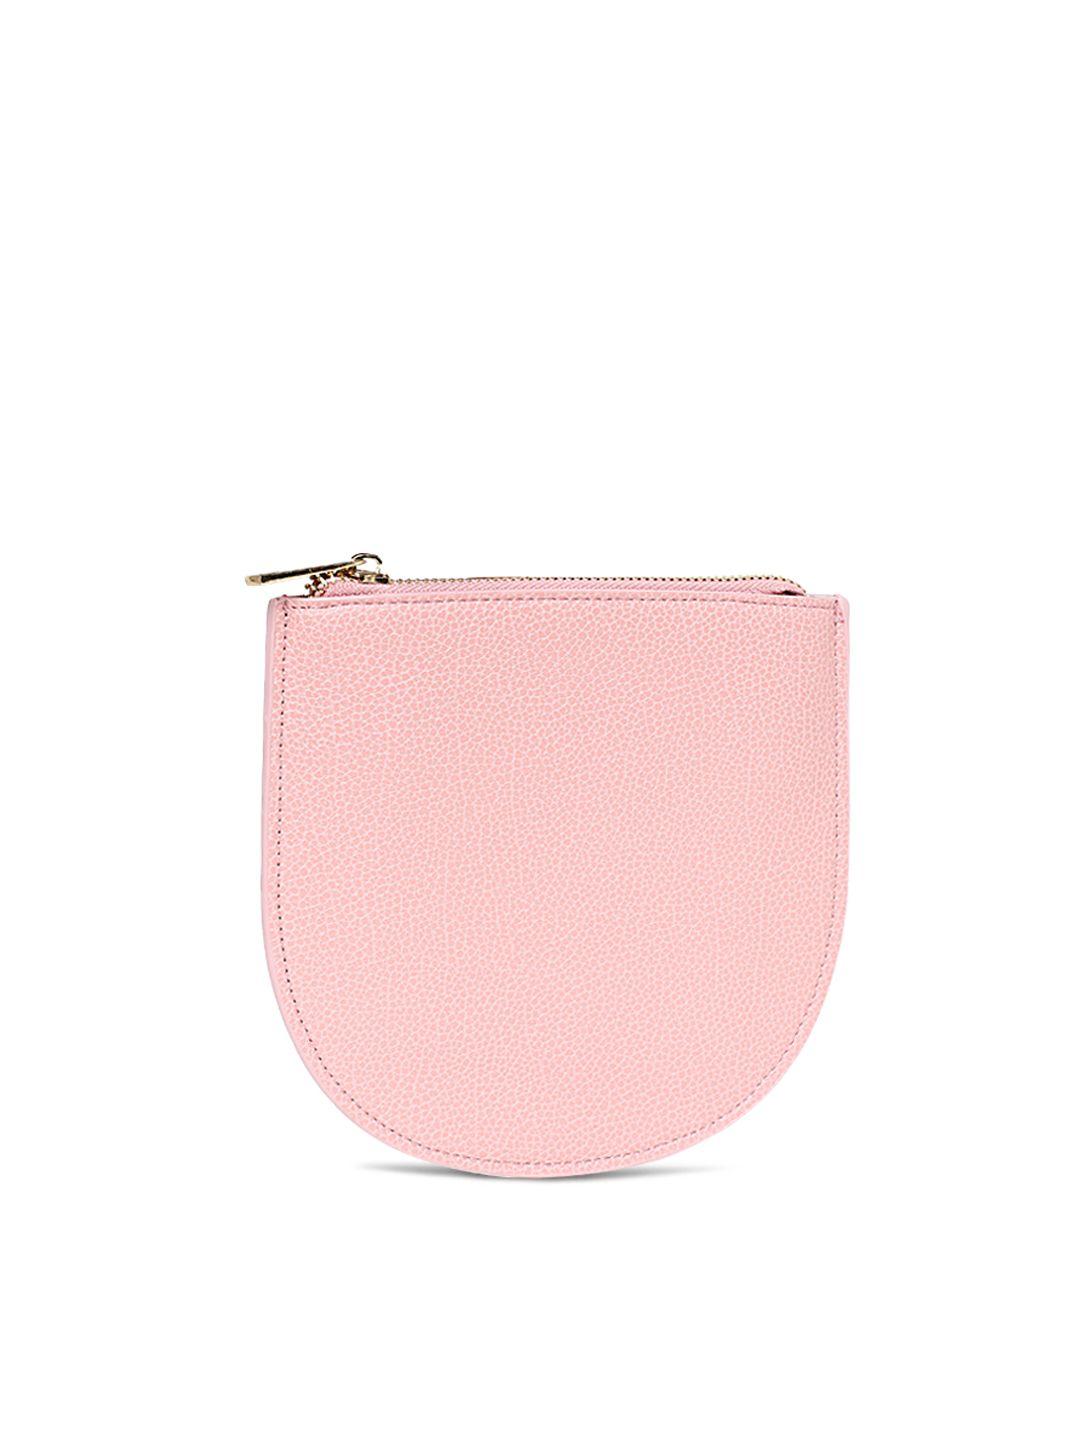 forever-21-pink-solid-clutch